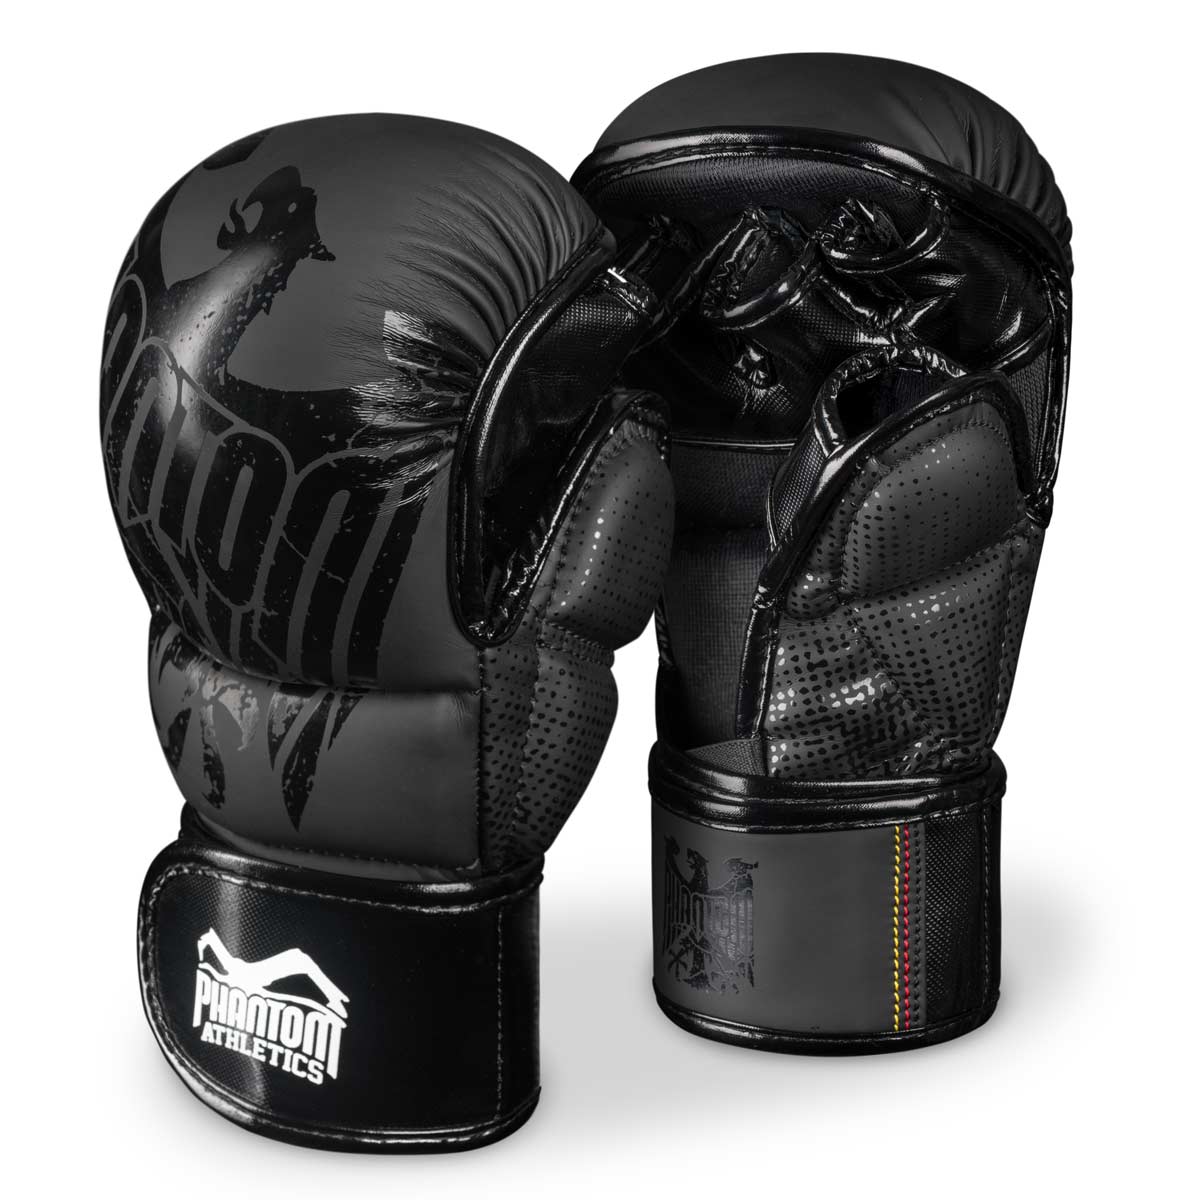 Phantom Team Germany MMA sparring gloves for training and competition. With a large Germany eagle and lots of details. Highest quality workmanship and outstanding protective effect. 